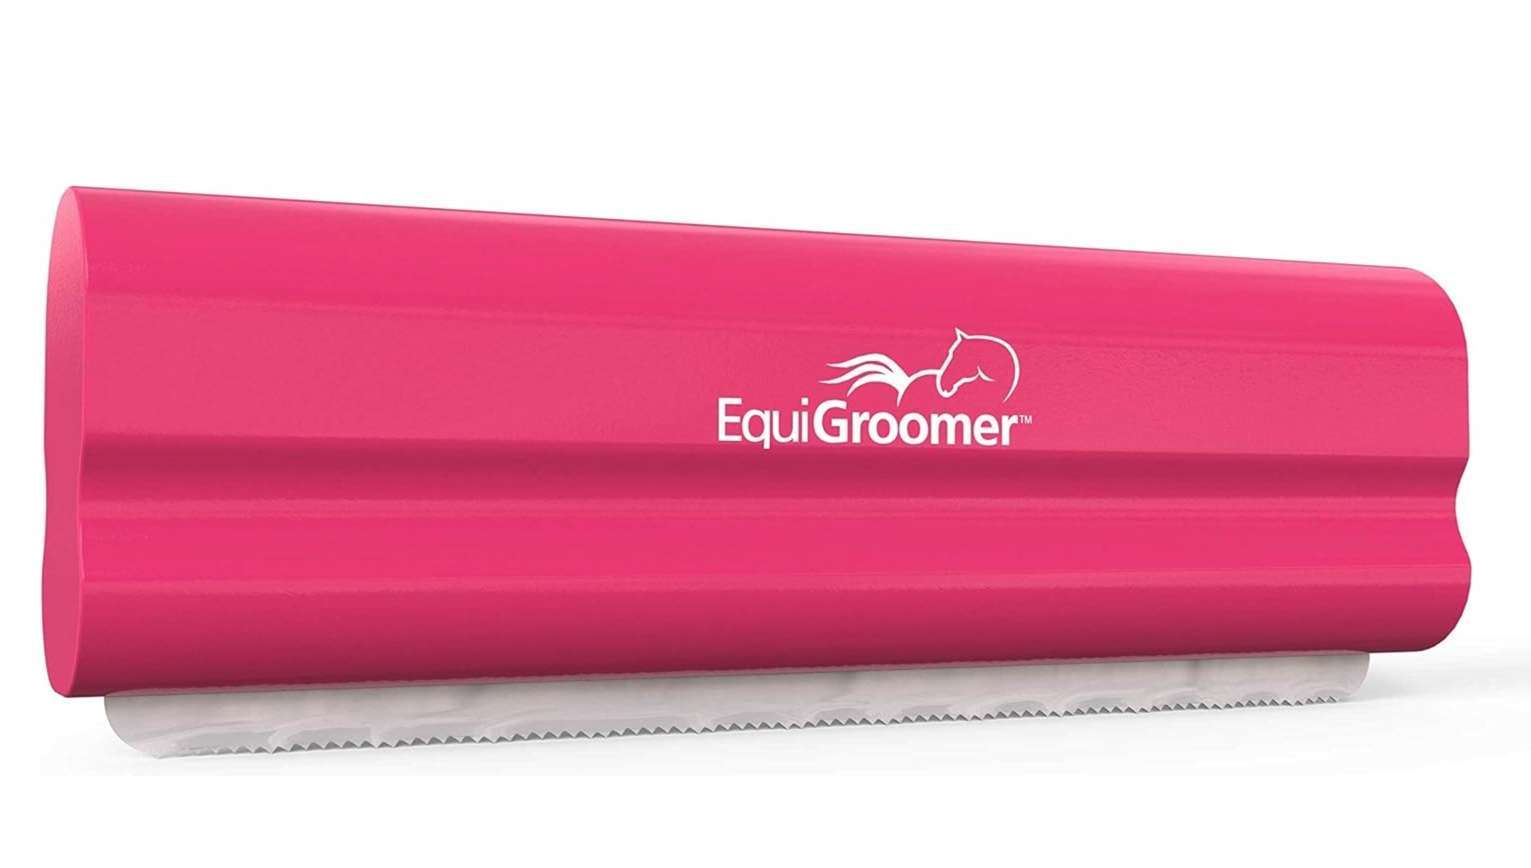 EquiGroomer for horses and pets